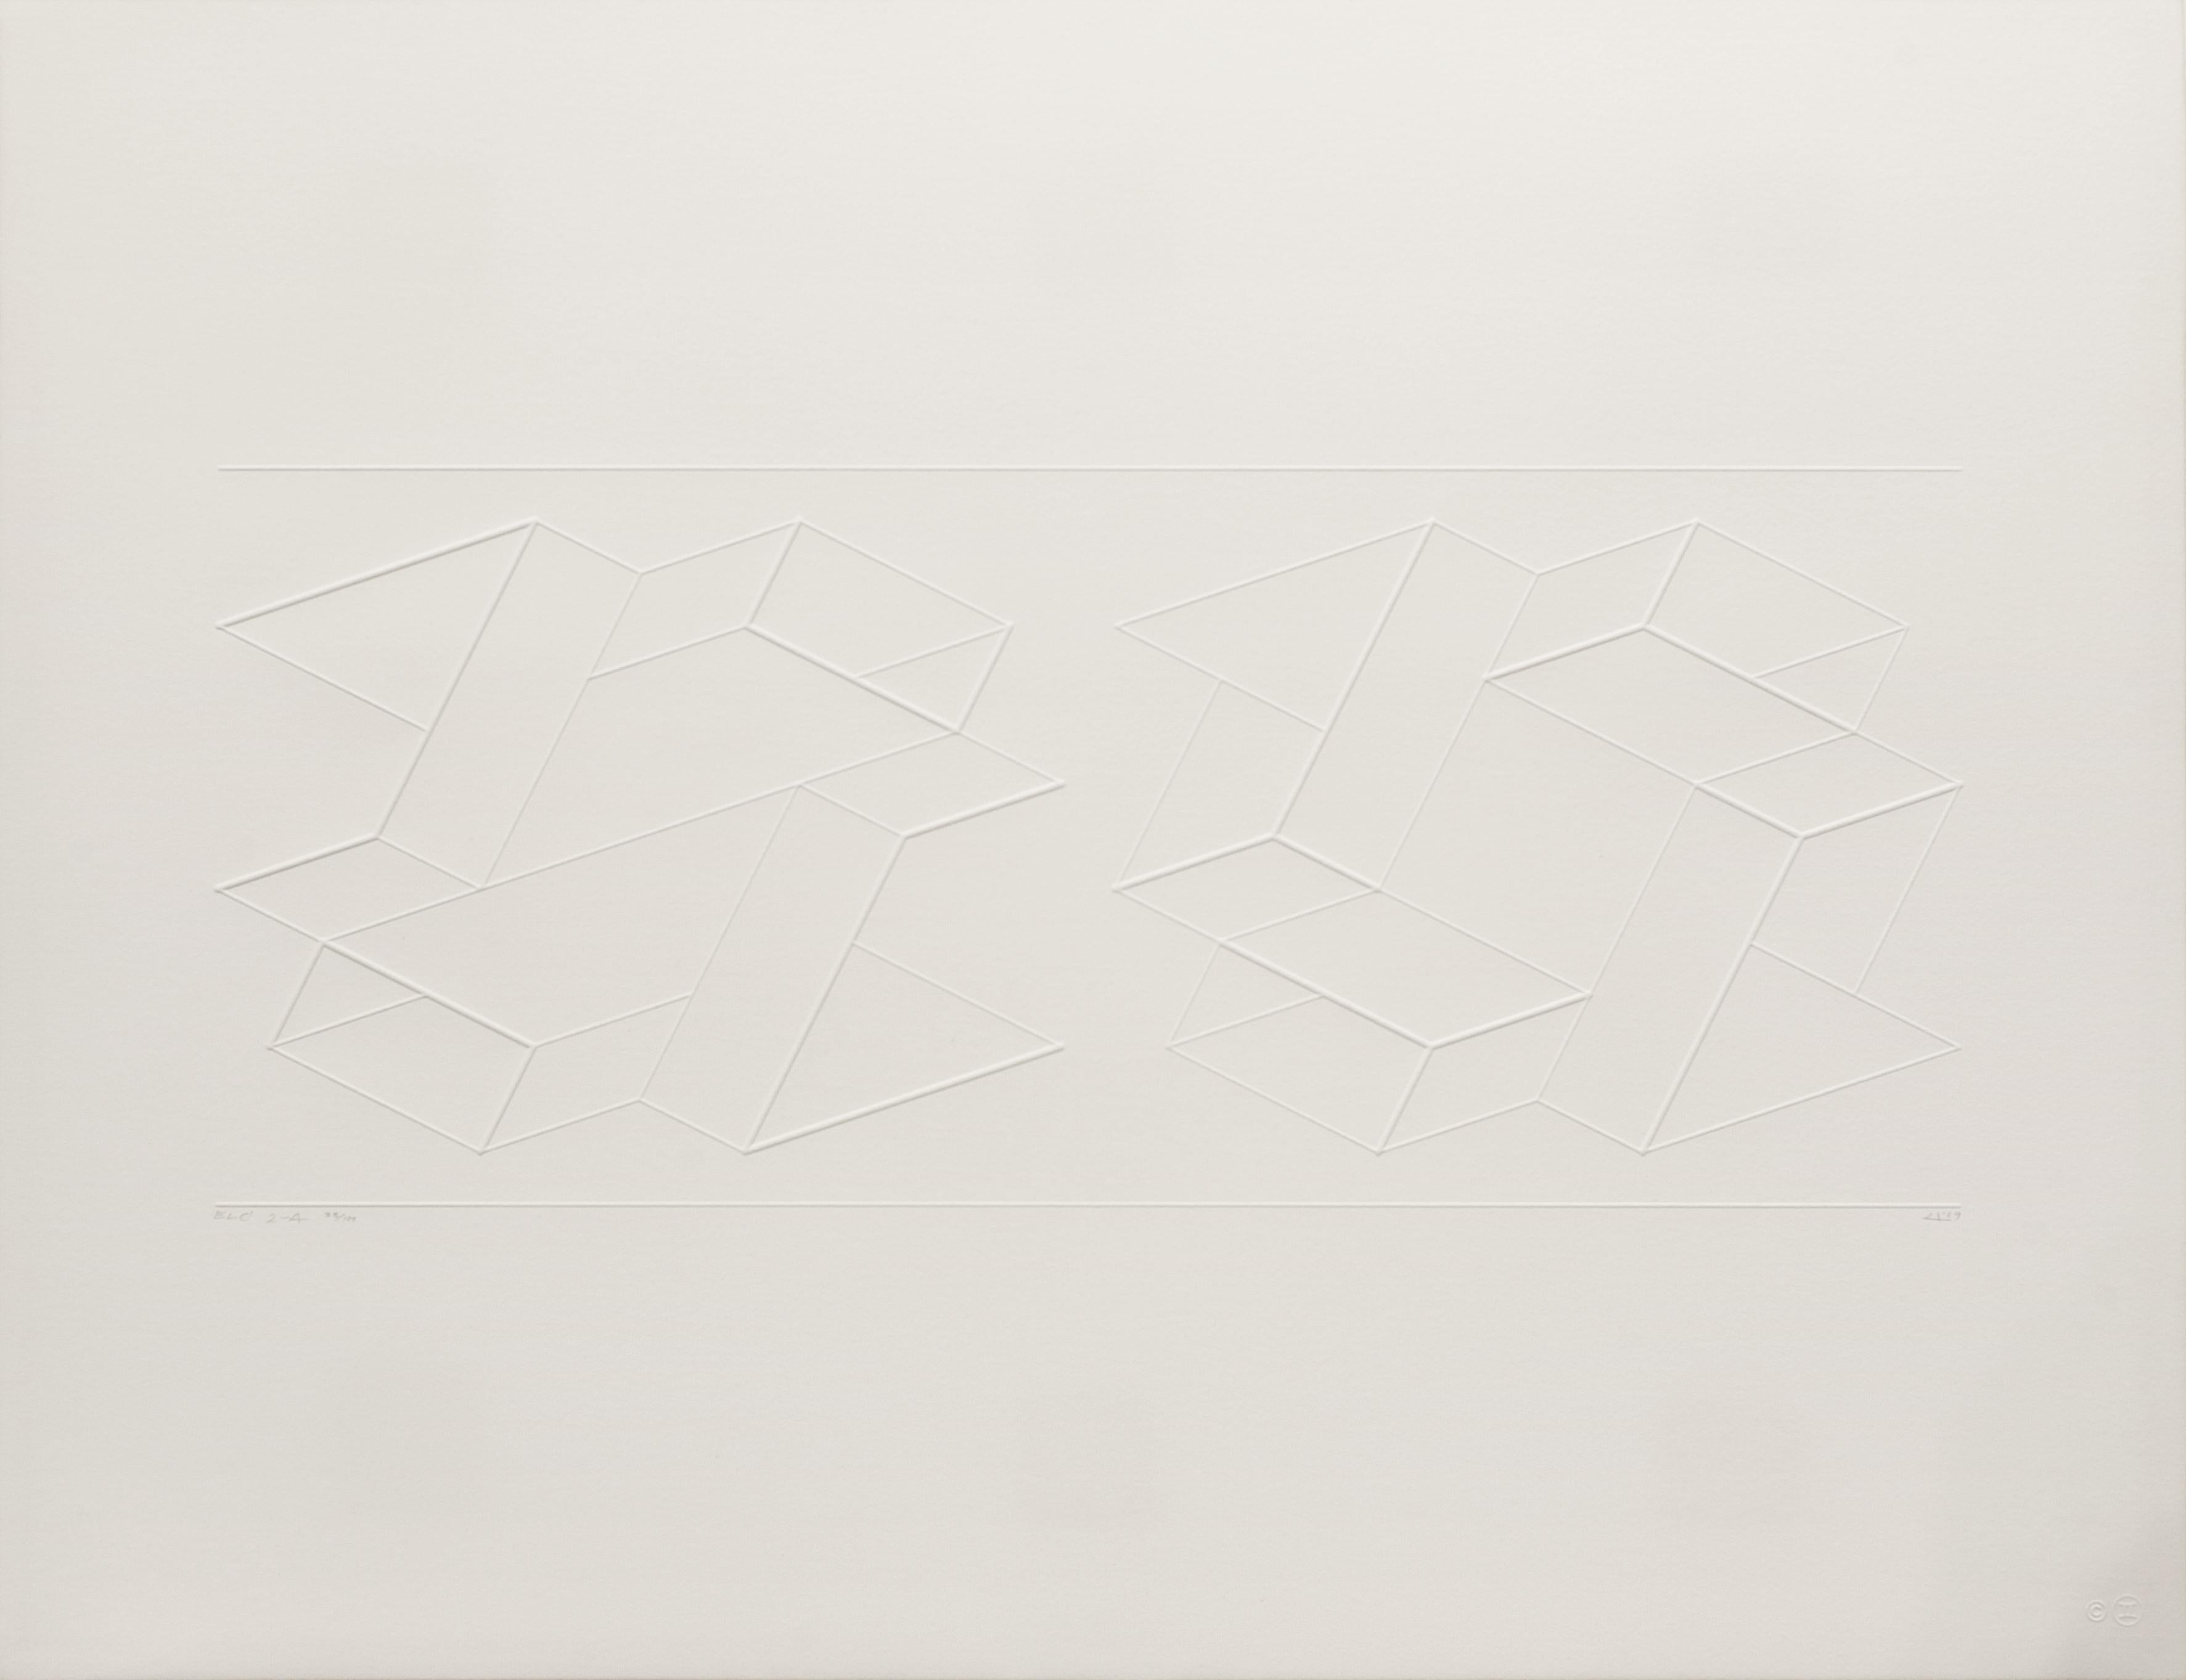 Embossed Linear Constructions (ELC) 2-A, 1969 - Print by Josef Albers